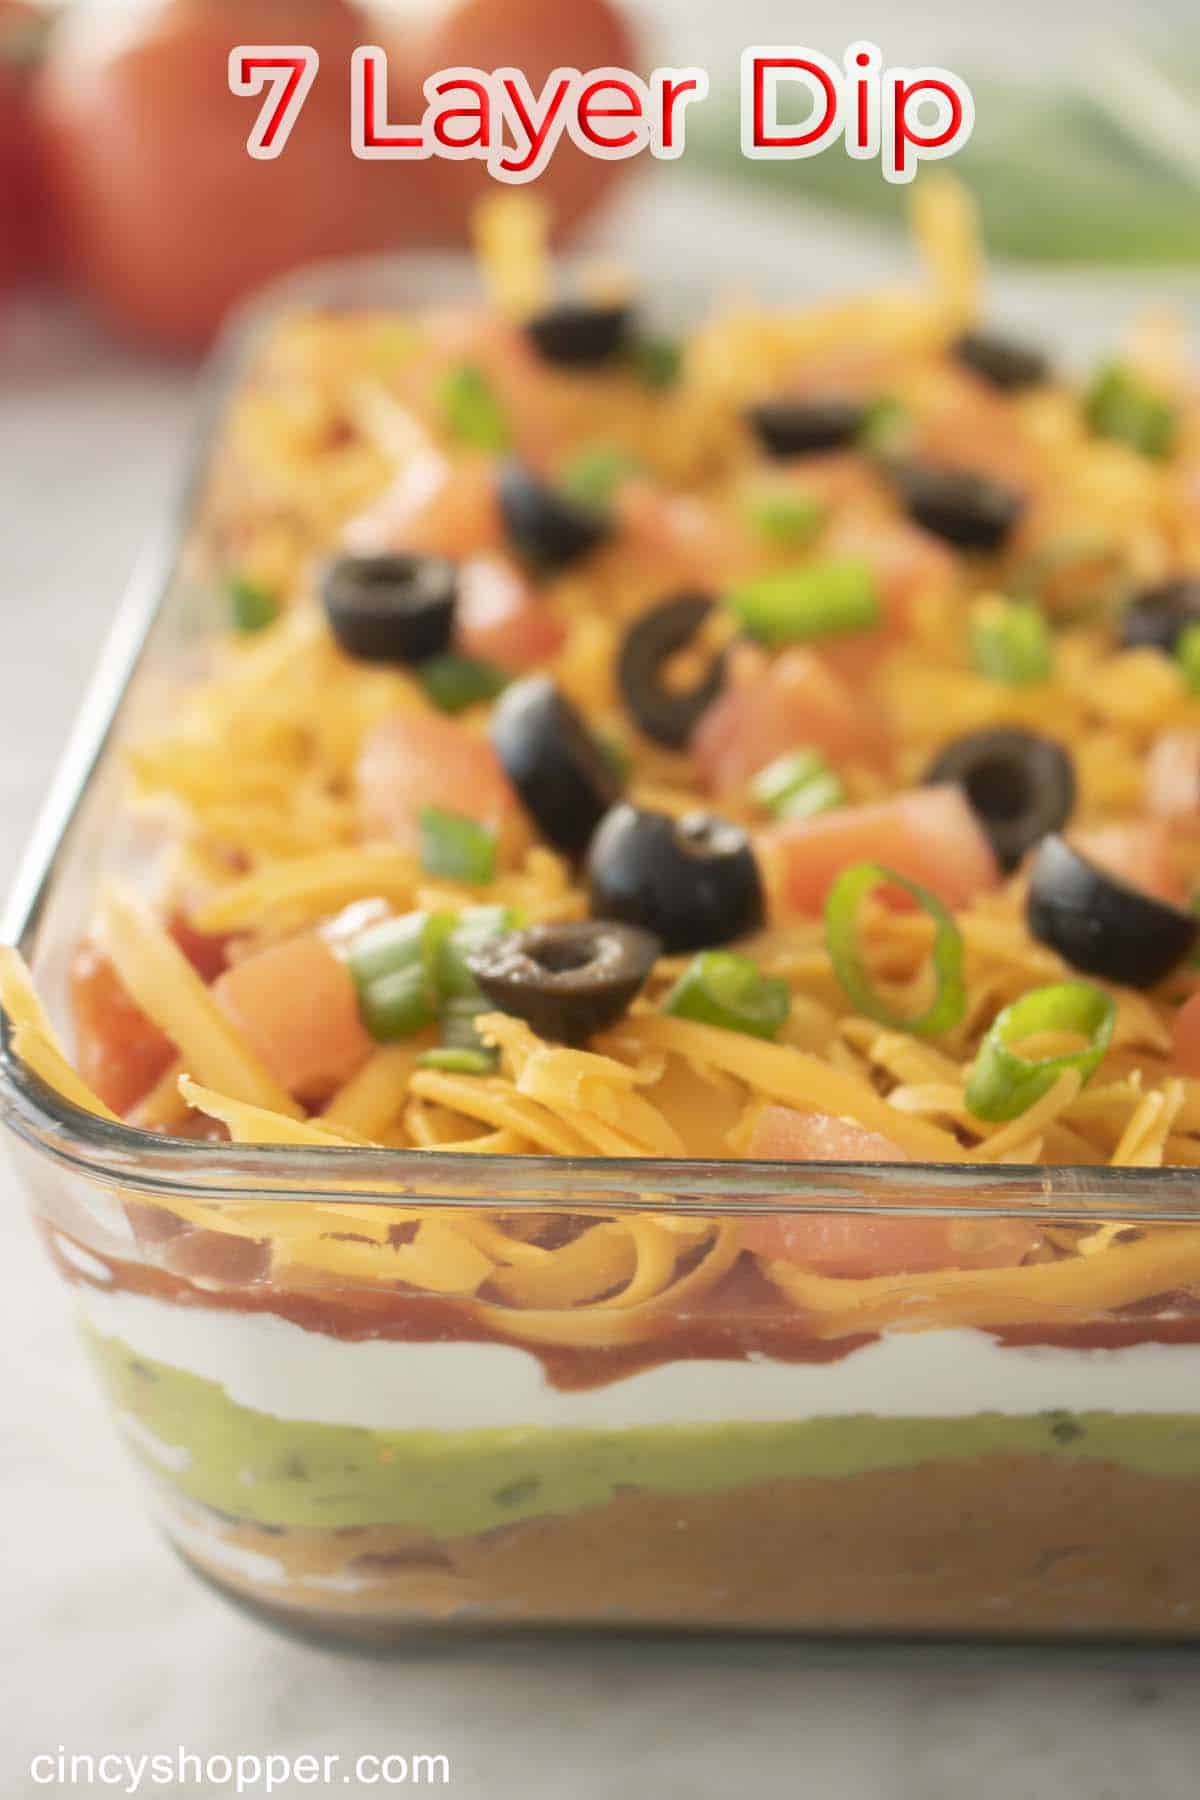 Text on image 7 Layer Dip